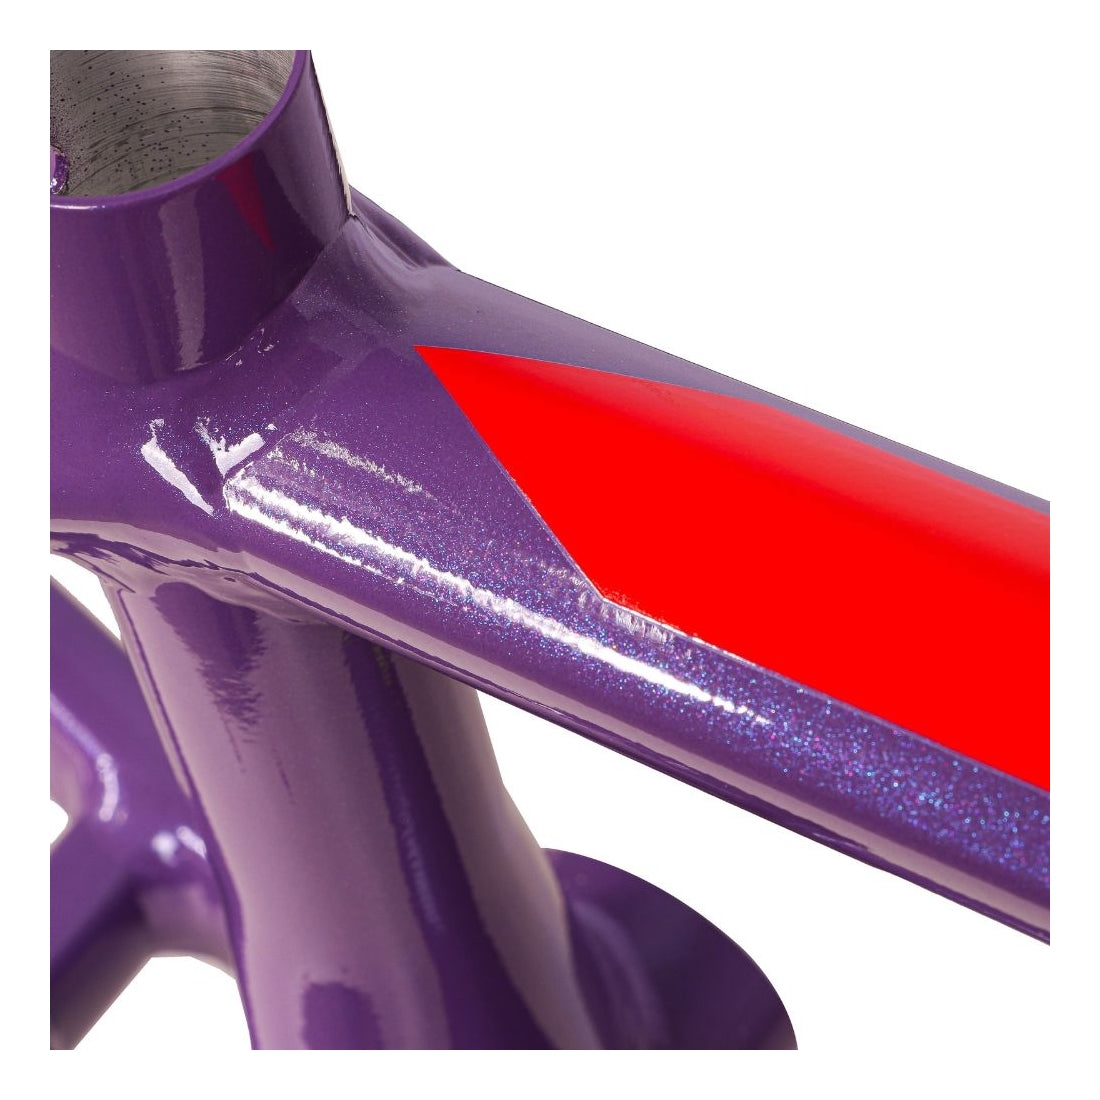 Close-up of a purple metallic hydroformed aluminium Inspyre Concorde V3 Pro Cruiser frame with a red accent.